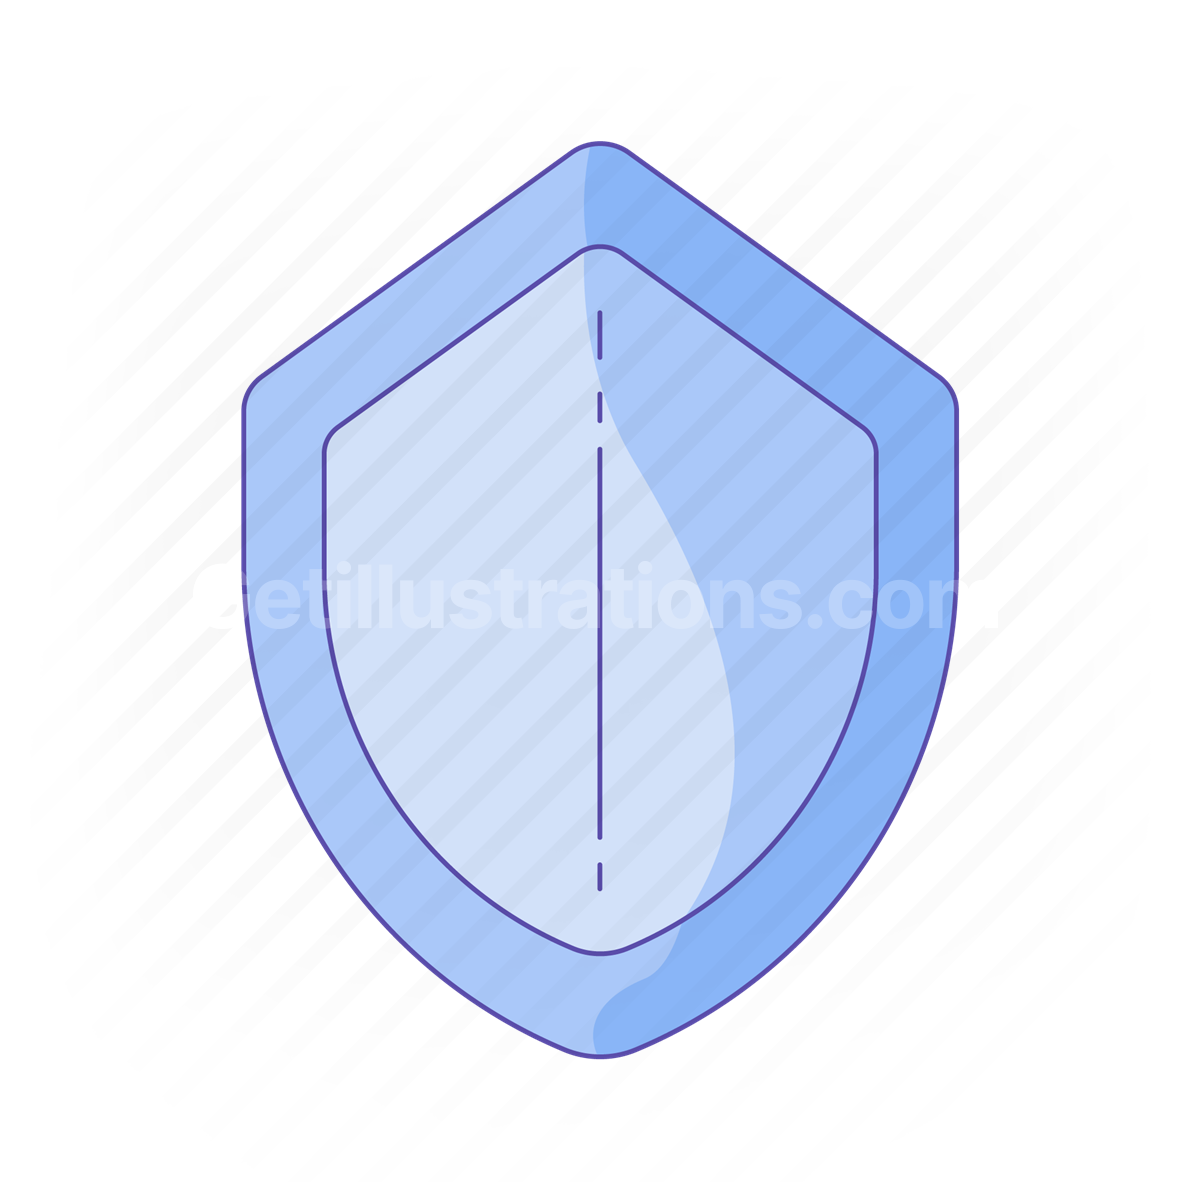 shield, protection, safety, privacy